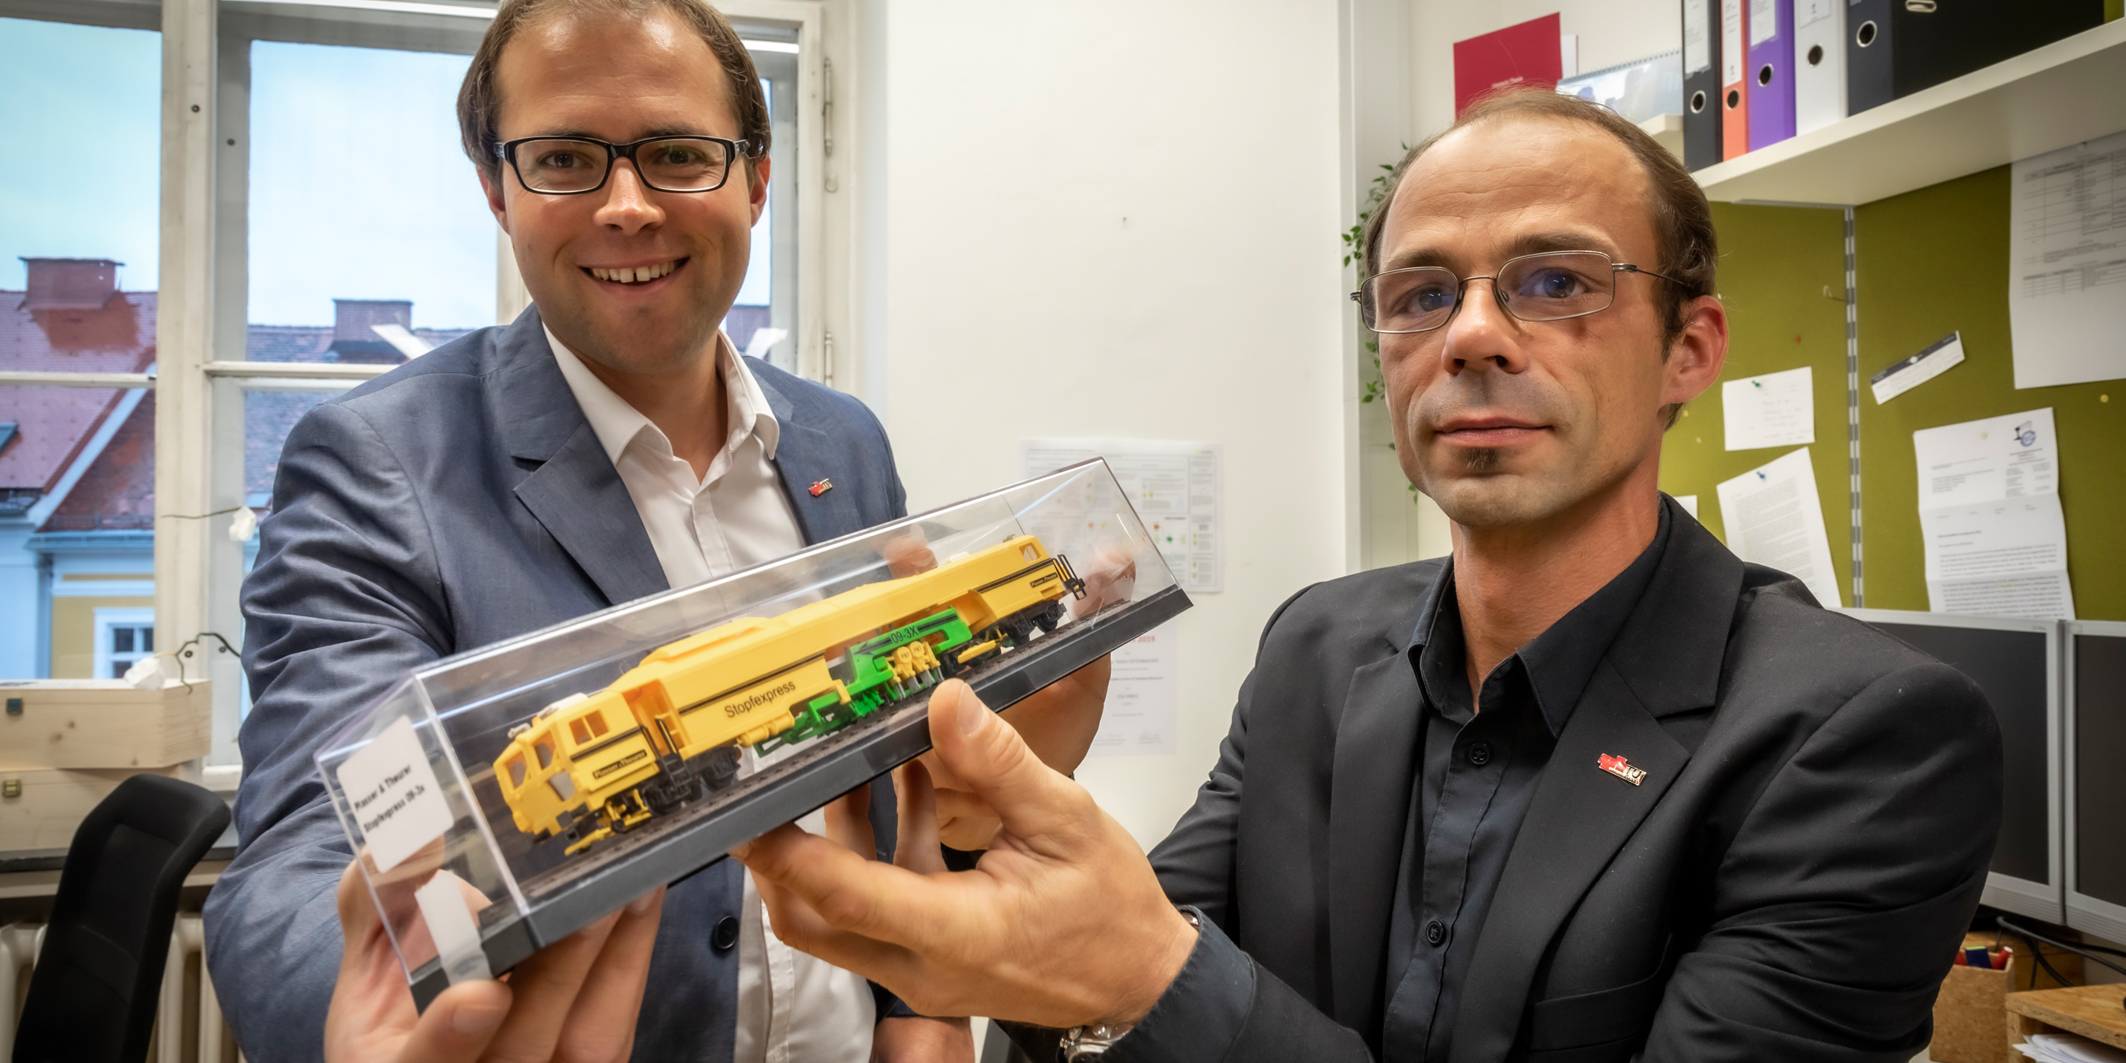 Two TU Graz researchers, in the foreground a conductor's cap